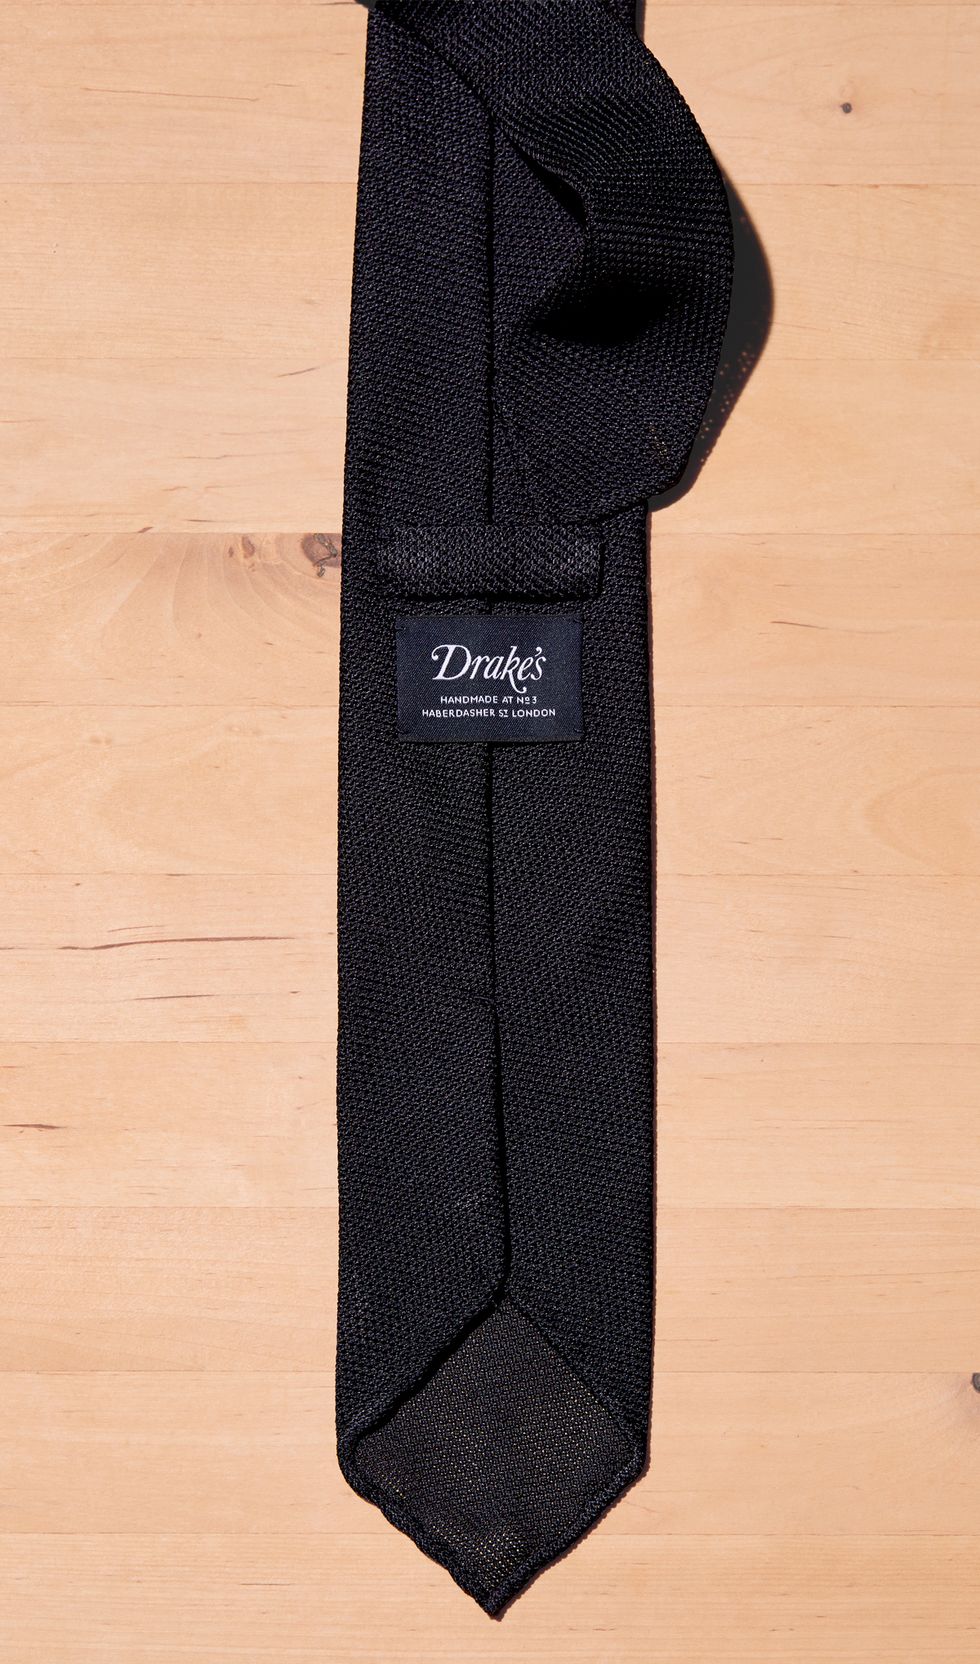 If You're Only Going to Own One Tie, Make It This One